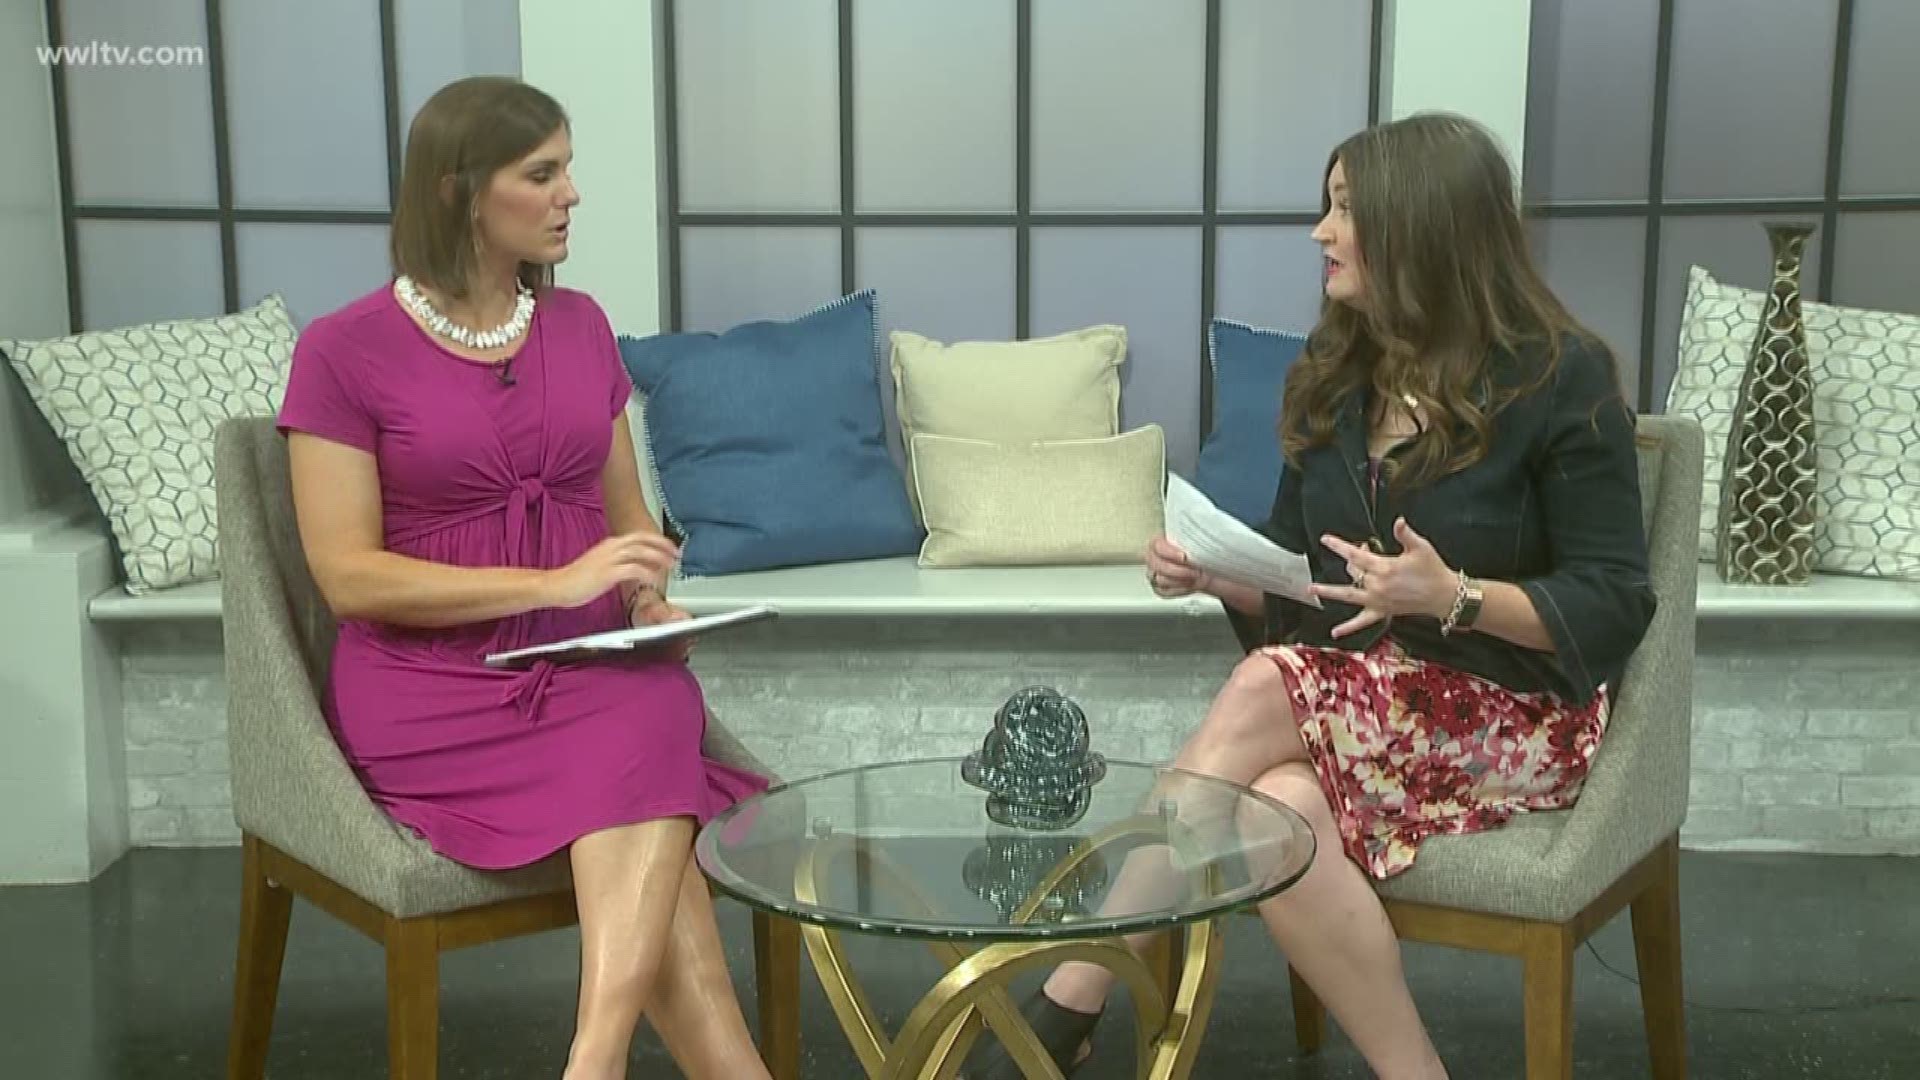 New Orleans Bride Magazine Editor Melanie Spencer is here to give some tips for brides planning a wedding during hurricane season.